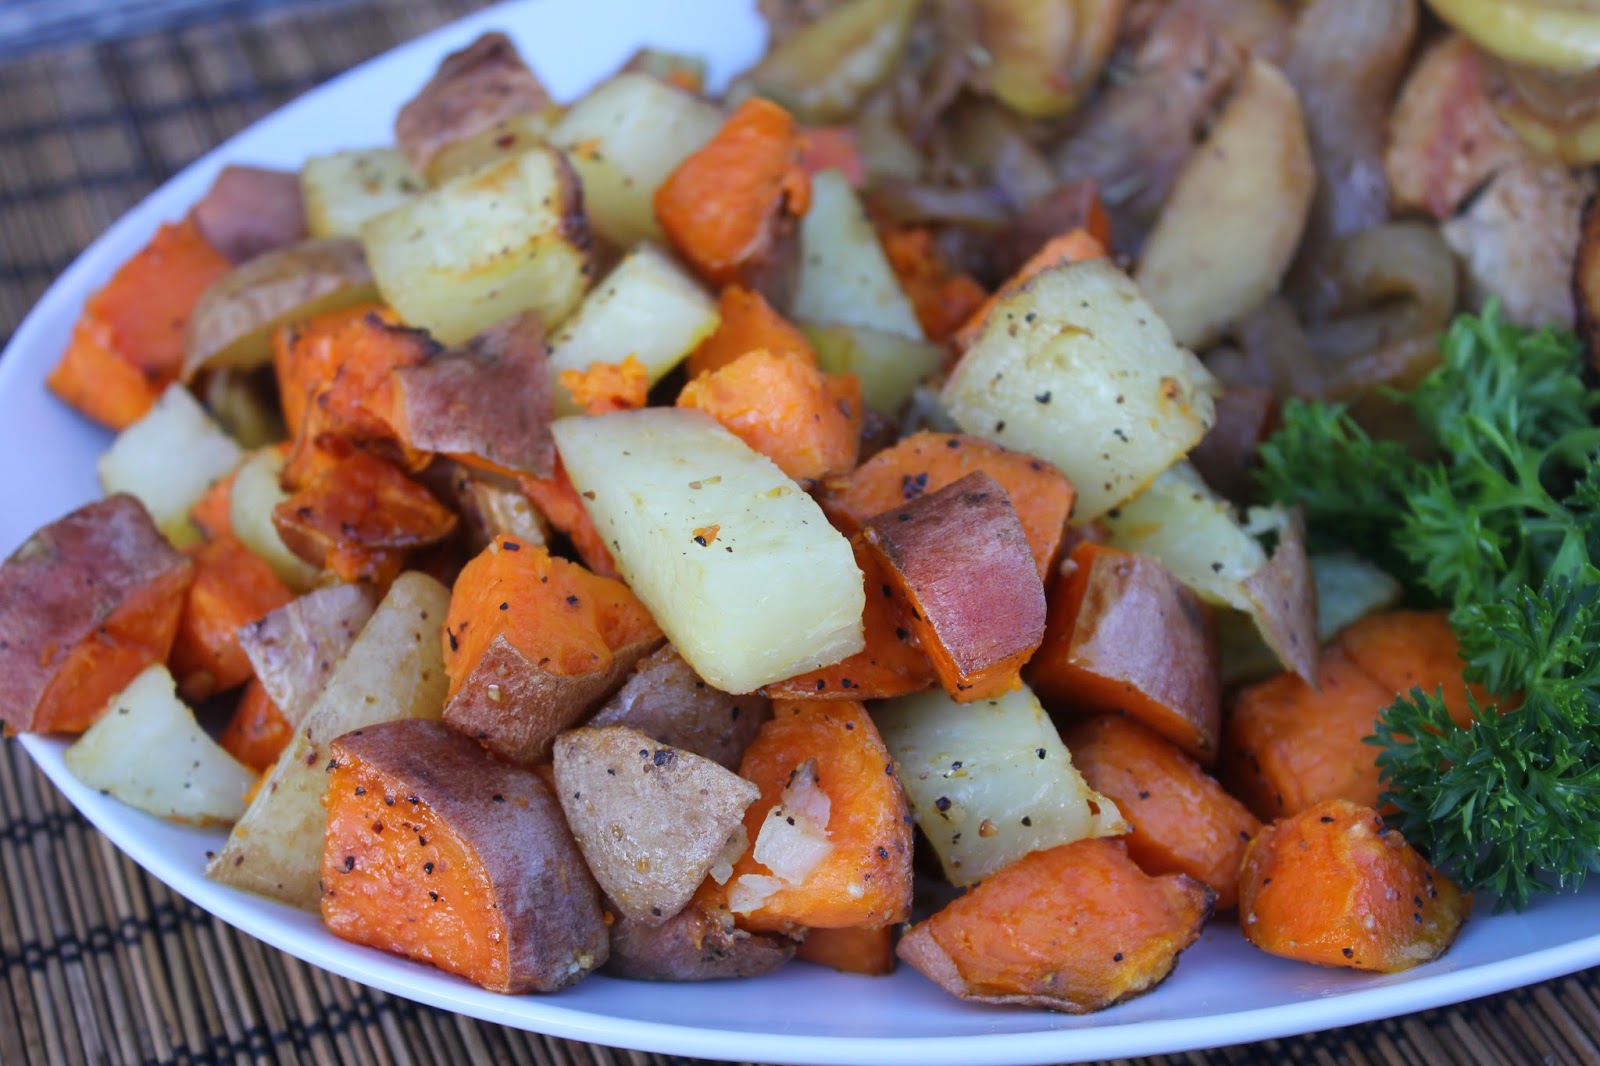 Recipe: Side Dishes, Recipe: Vegetable, sweet potatoes, yams, potatoes, Fall Favorites, Recipe: Pork, Recipe: Main Dish, Deals to Meals, Caramel Apple Pork Chops, Roasted Red and Sweet Potatoes